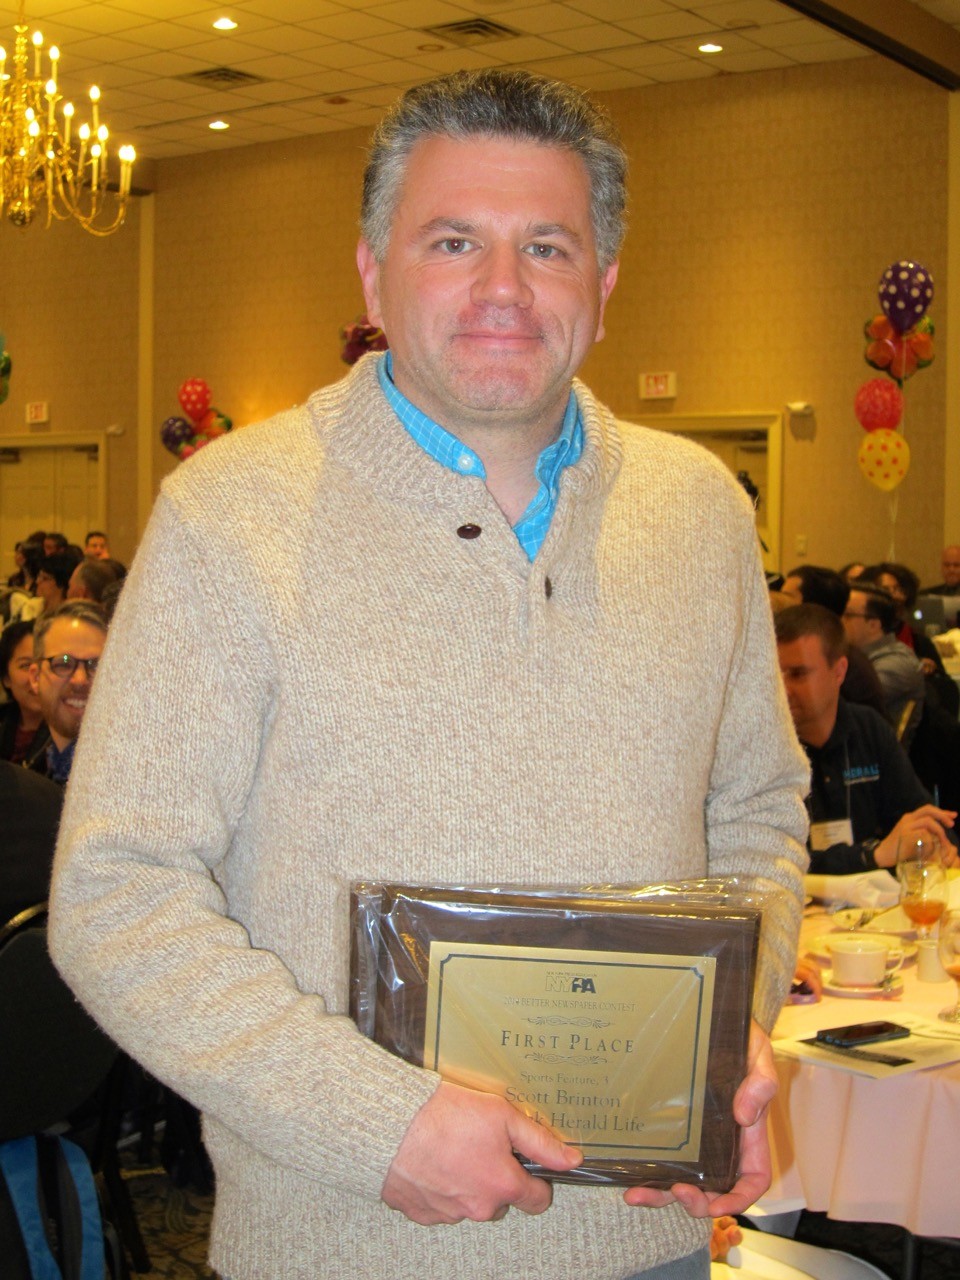 Scott Brinton took home multiple awards for his writing